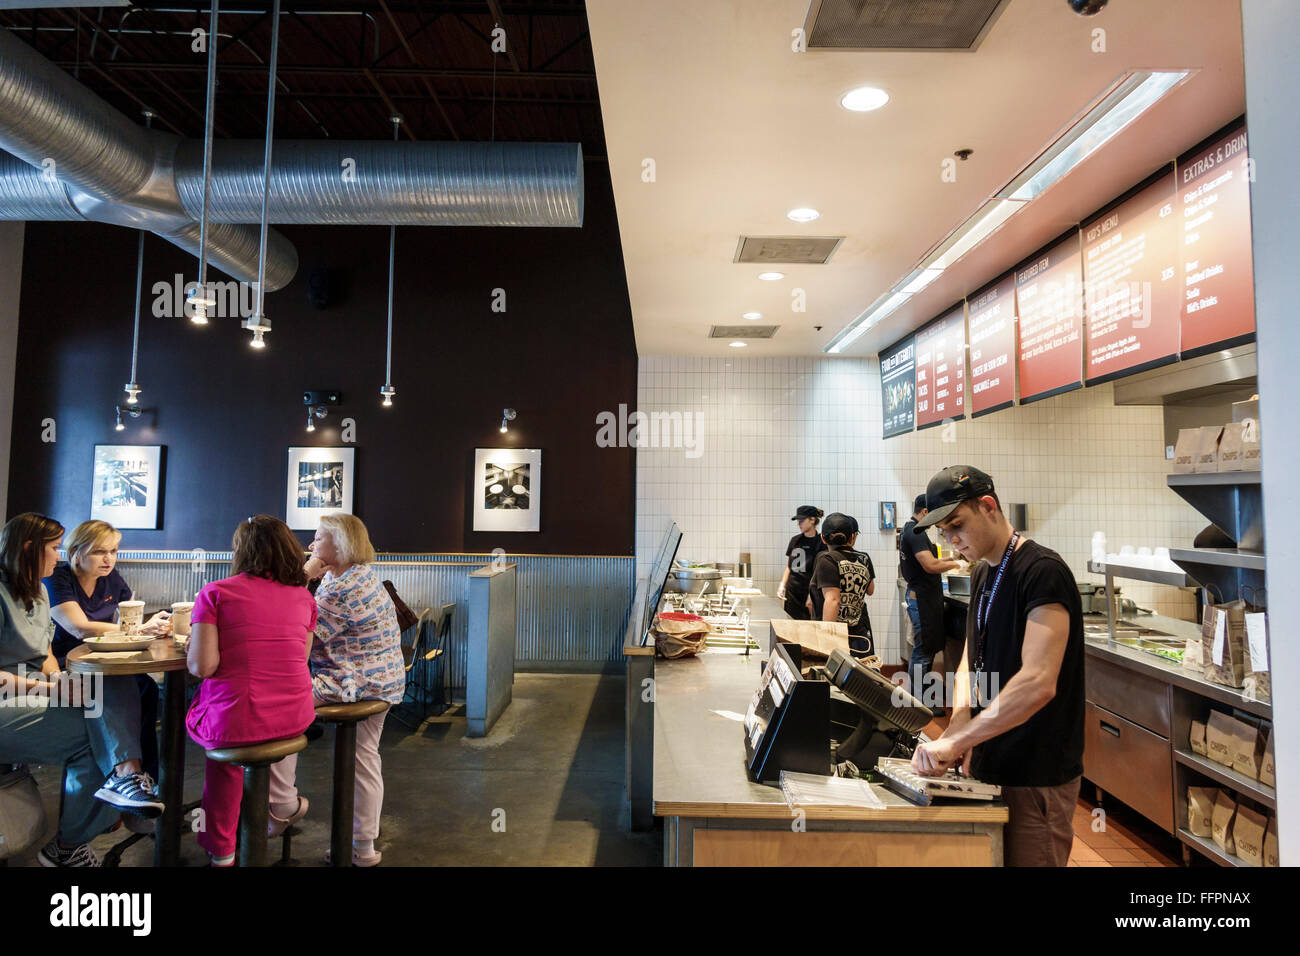 Florida South,Port St. Saint Lucie,Chipotle,restaurant restaurants food dining cafe cafes,Mexican,food,interior inside,counter,cashier,adult,adults,ma Stock Photo